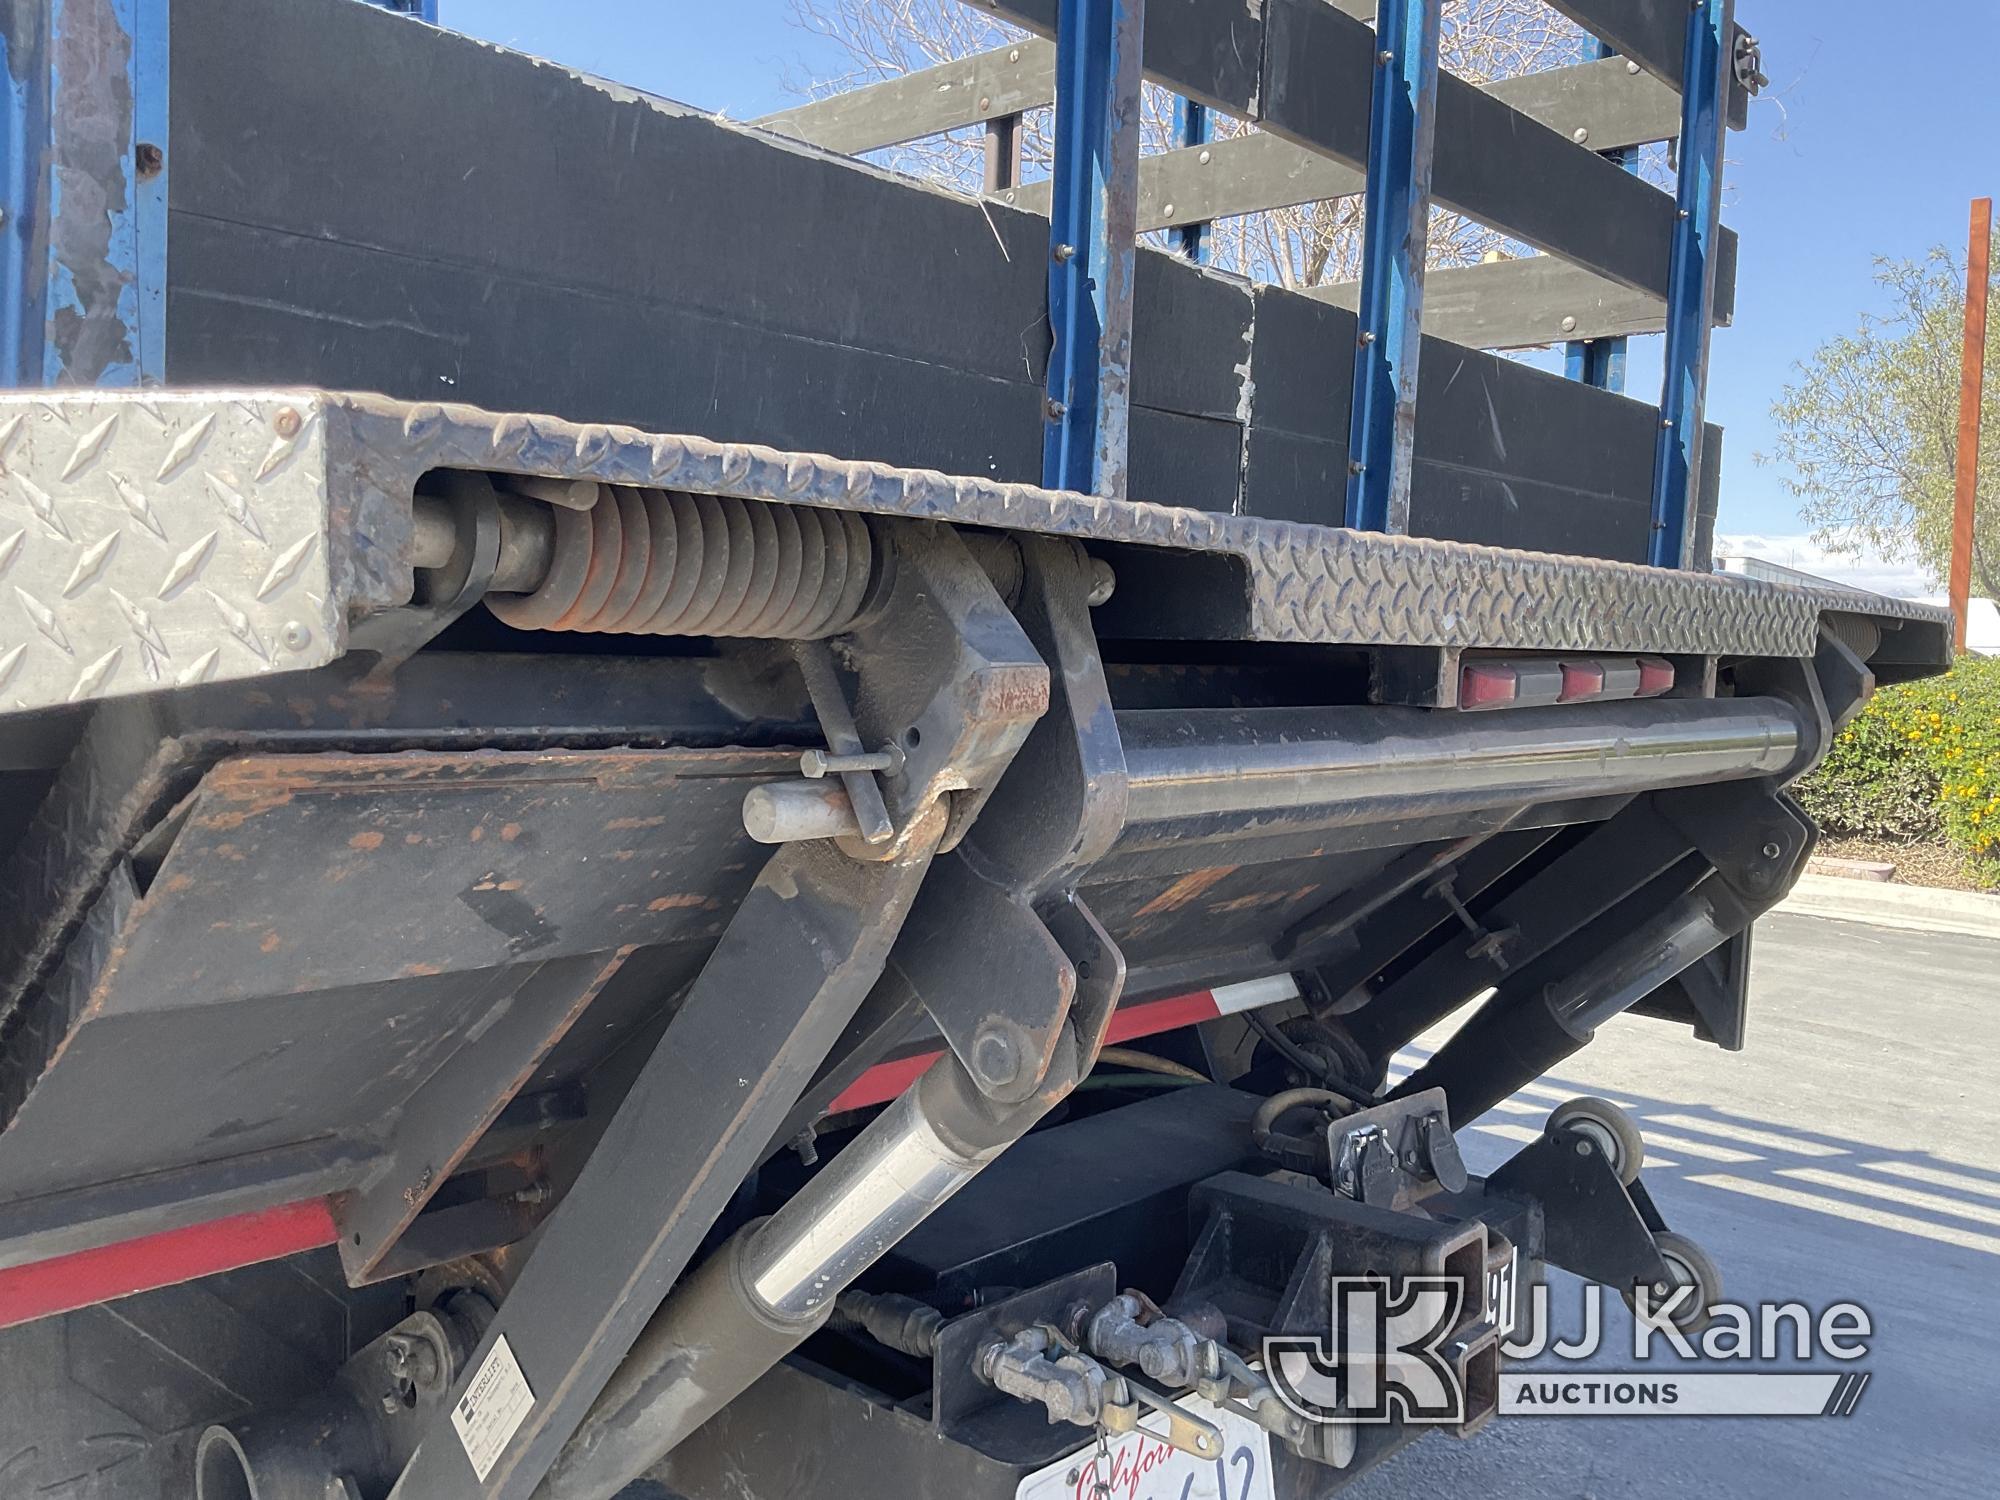 (Jurupa Valley, CA) 2009 Freightliner M2 106 Extended-Cab Flatbed Truck Runs & Moves, Check Engine L